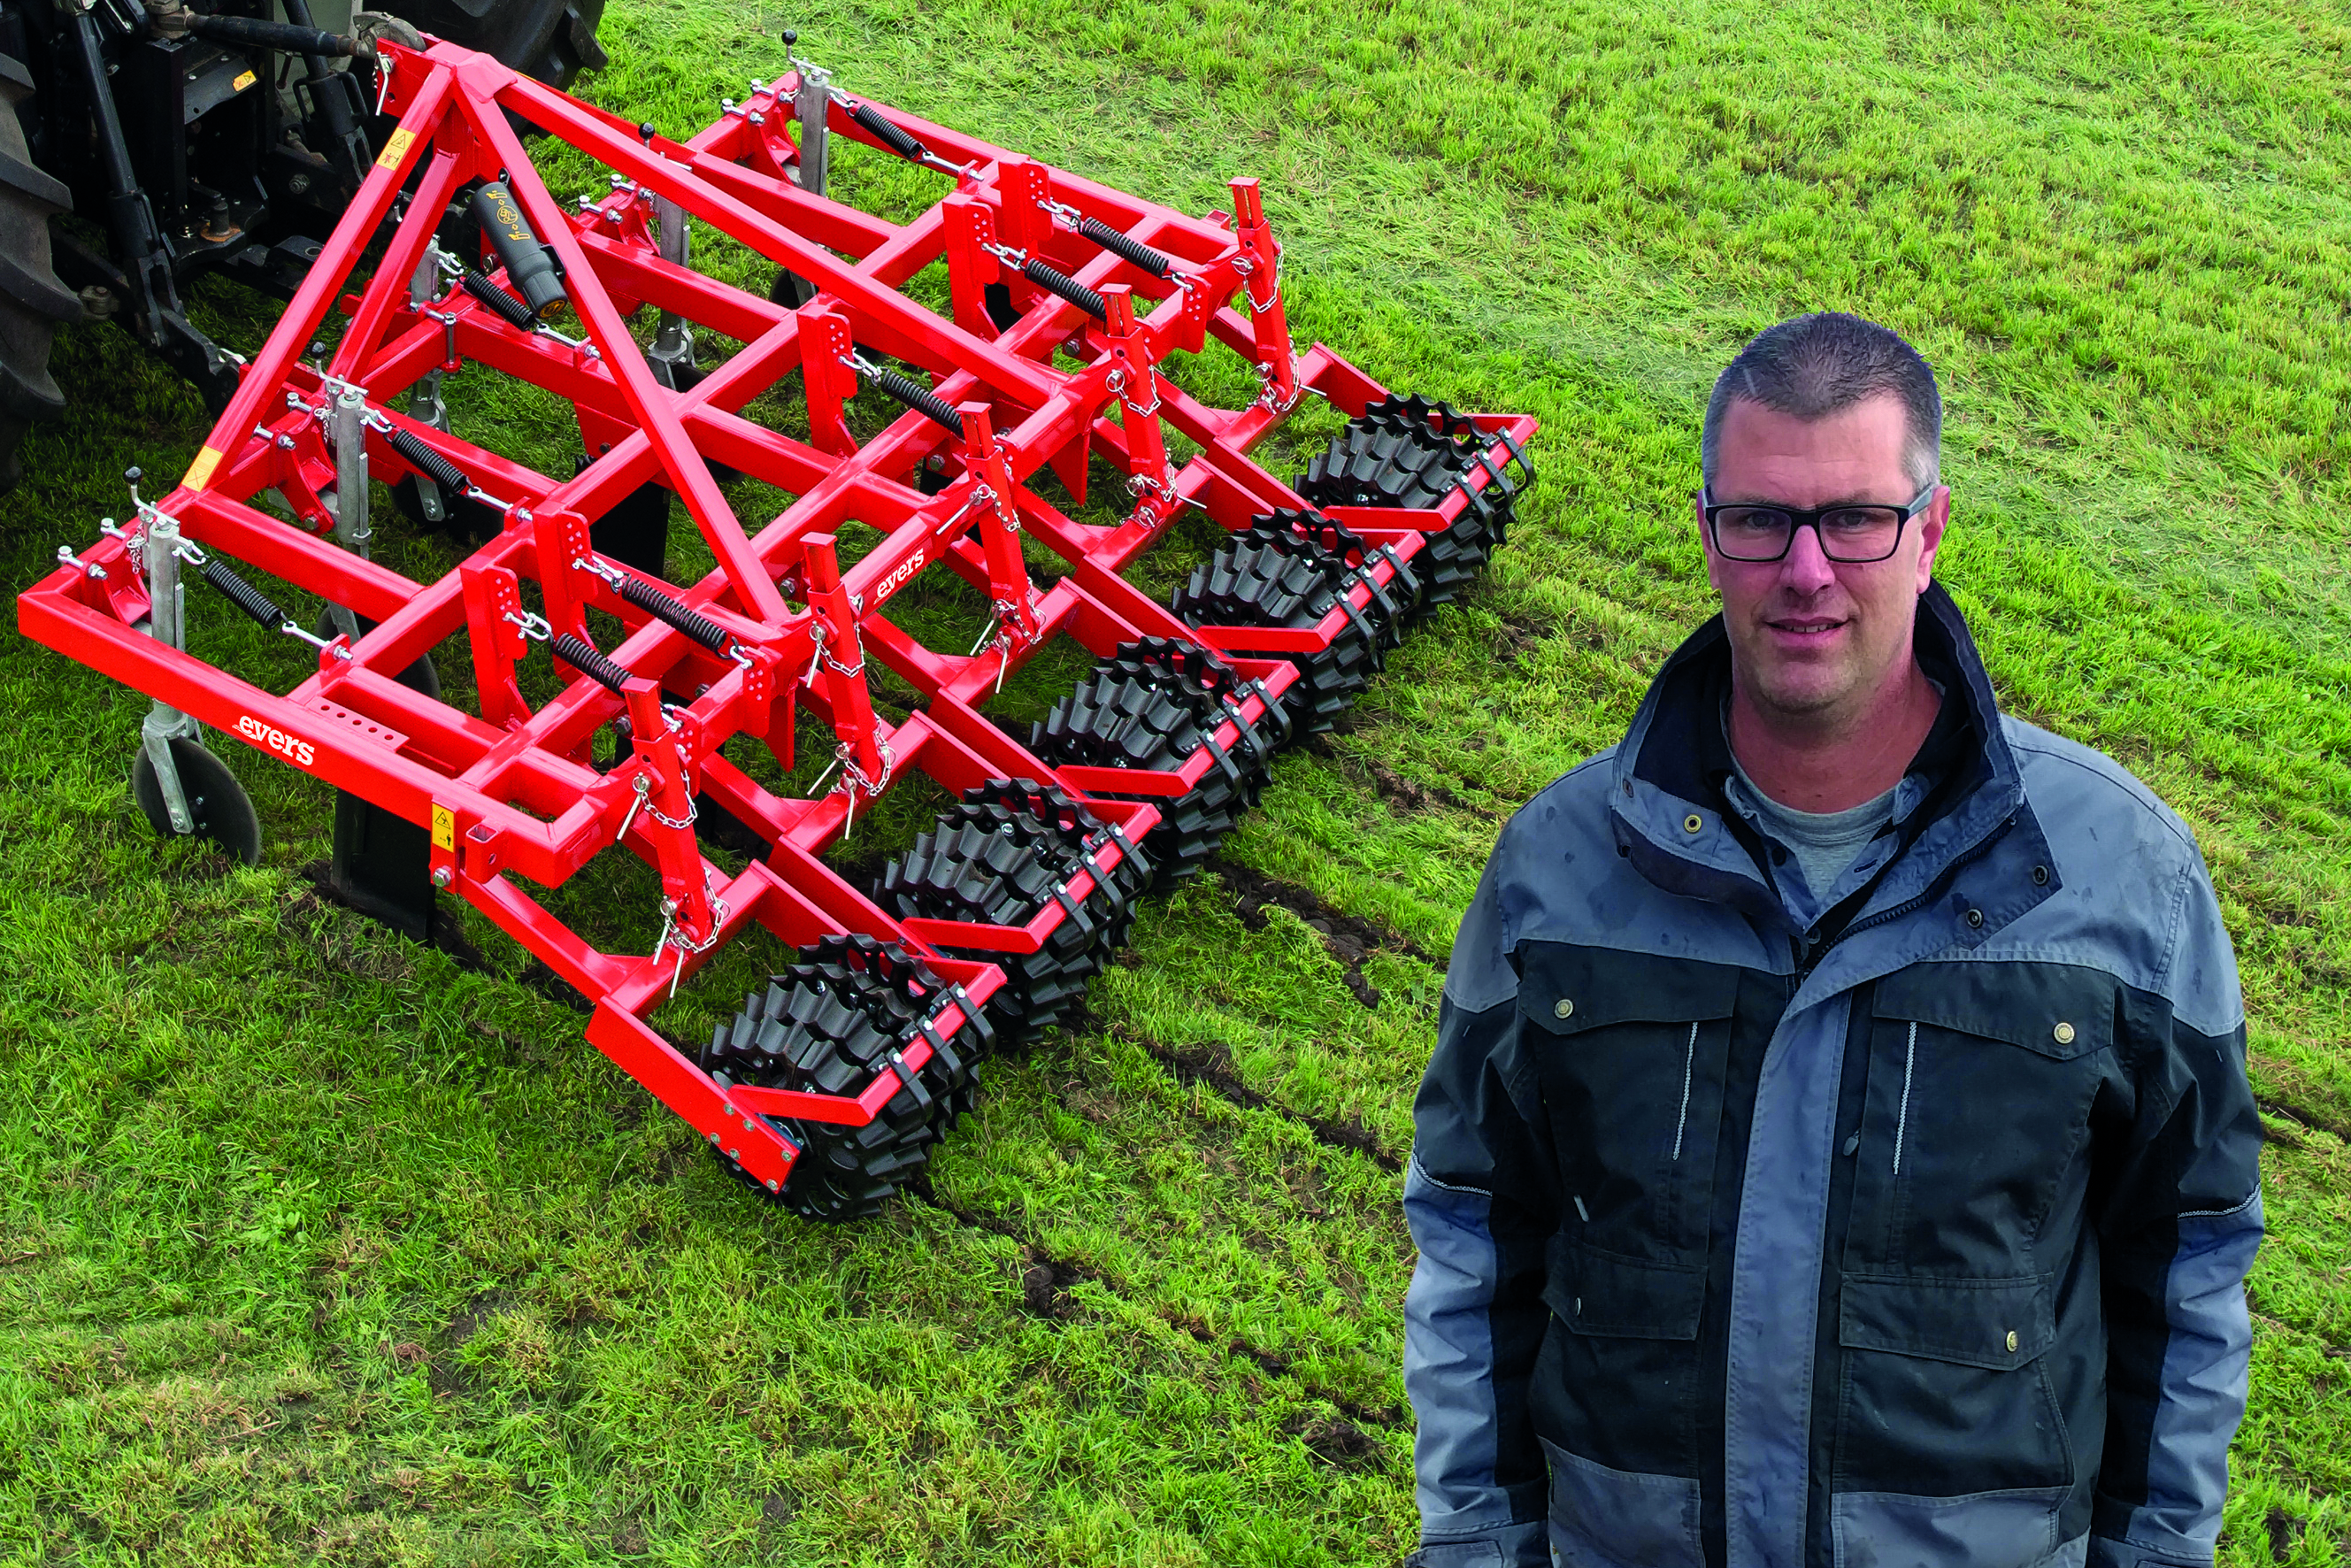 Wilco van de Brink, contractor in the Netherlands:  Evers Grassland subsoiler: more revenue at minimal cost, who wouldn’t want that